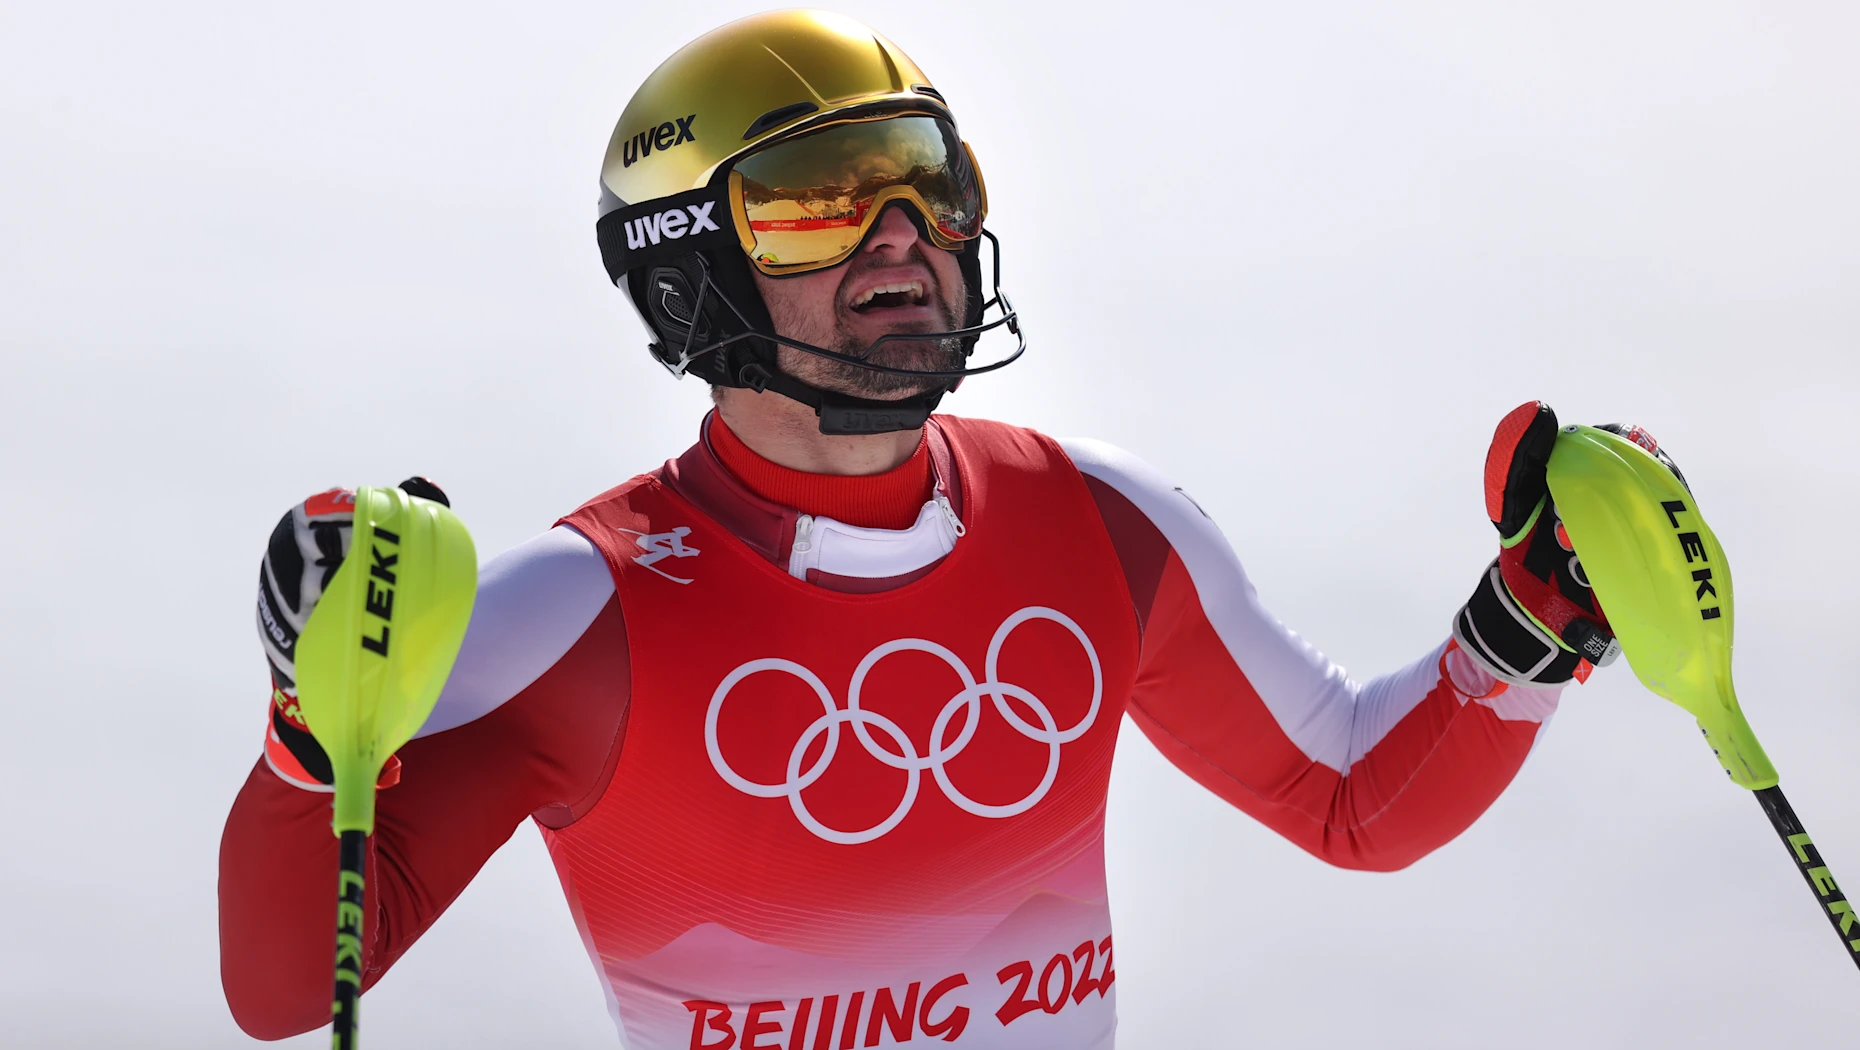 Johannes Strolz wins Alpine combined gold 34 years after father did the same